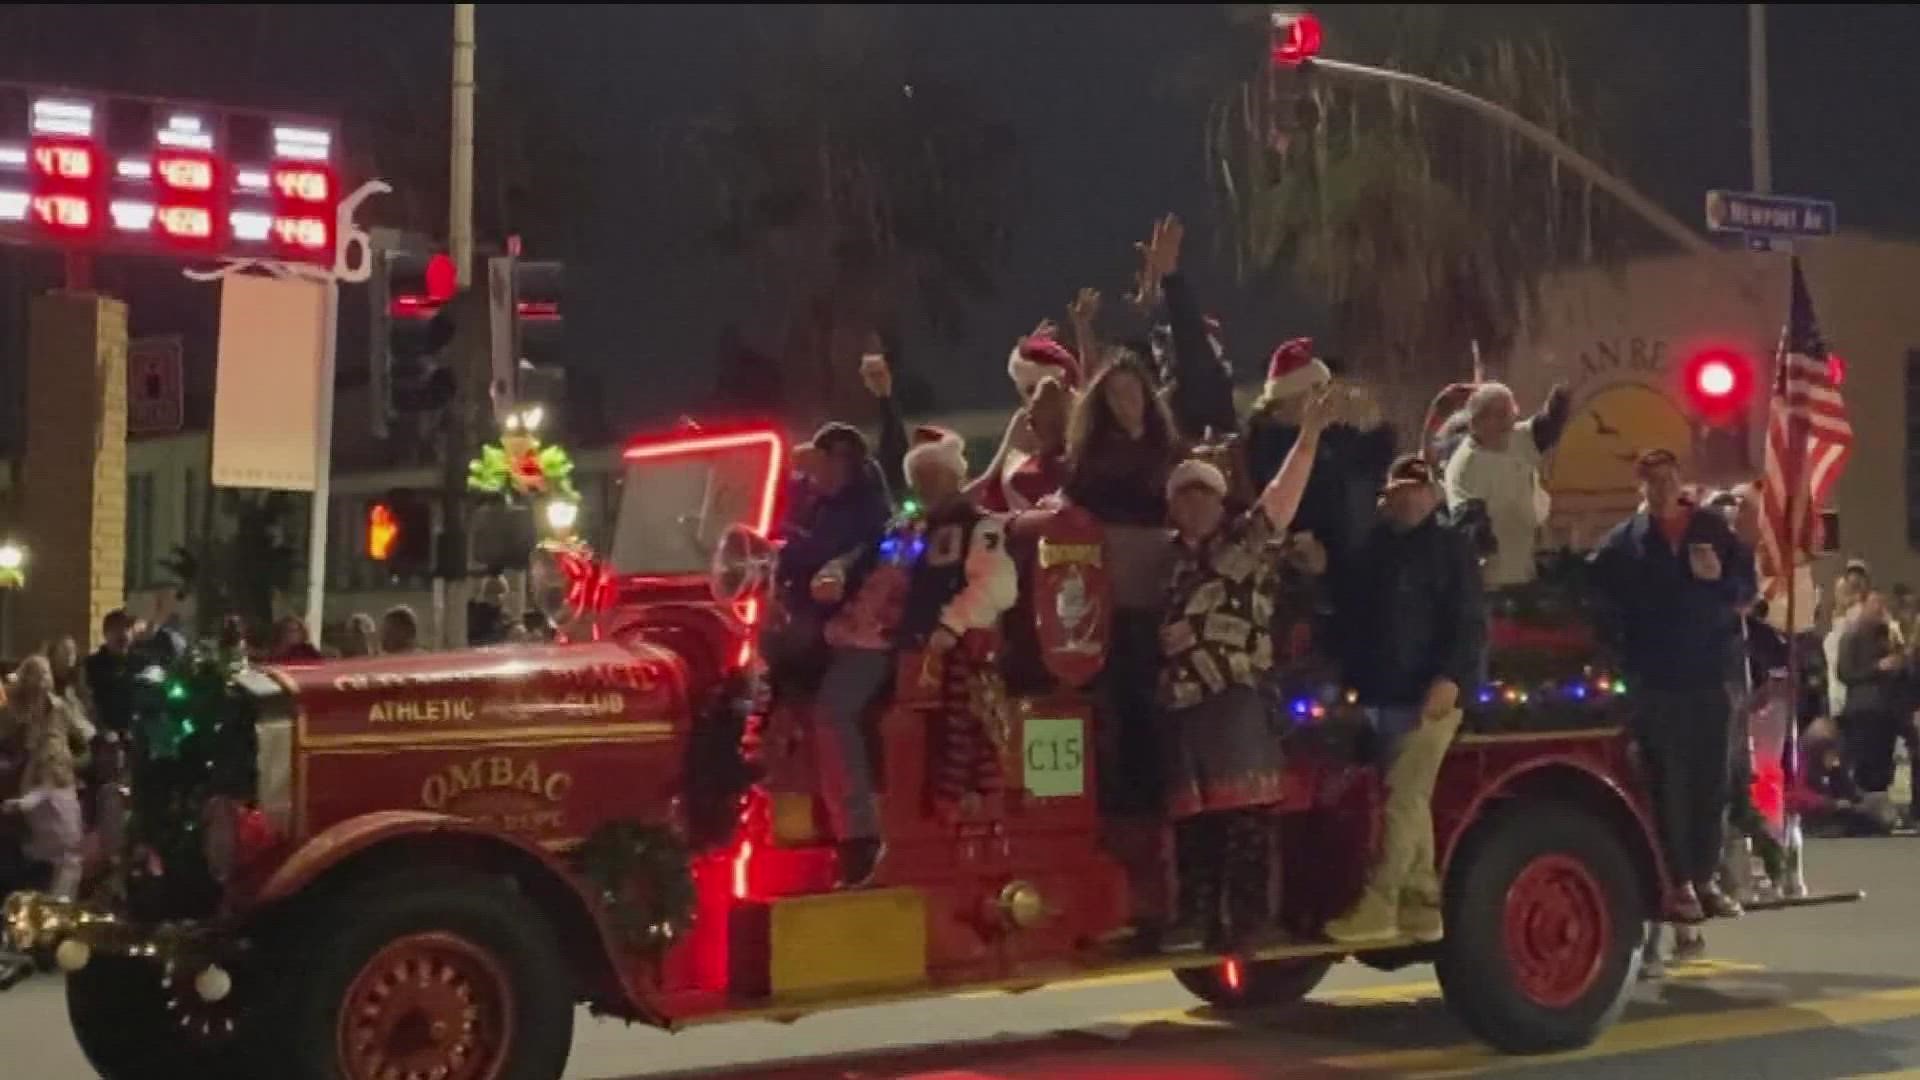 Recent attacks involving homeless has some people concerned about safety during the annual Ocean Beach holiday parade.